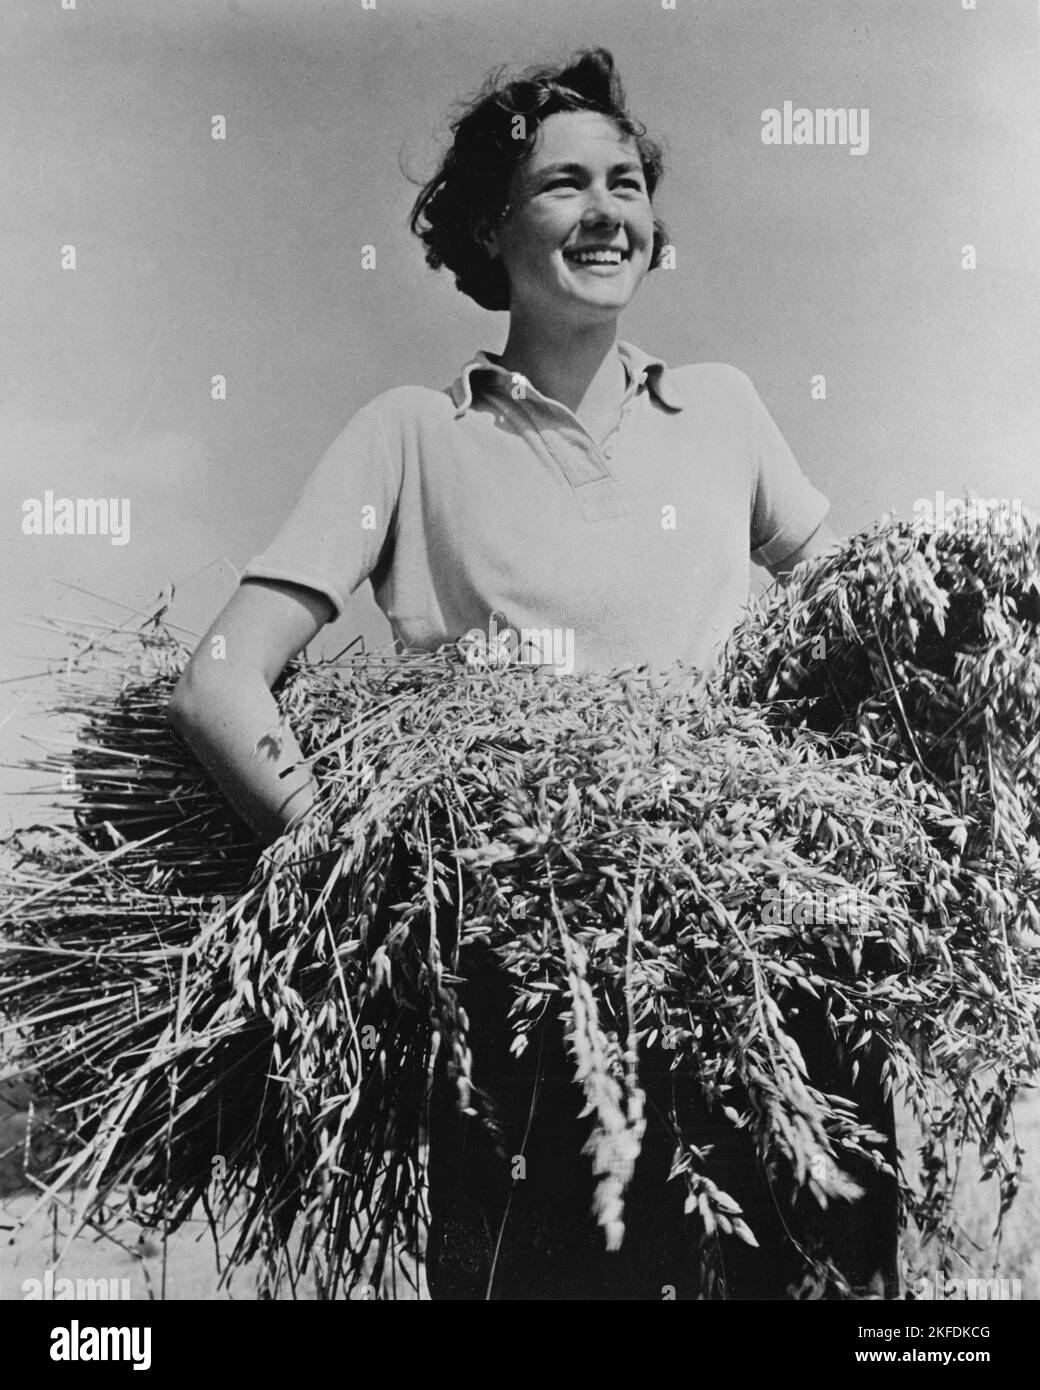 British woman circa April 1943 working on a farm as part of the Women's Land Army helping produce food during world war two Stock Photo